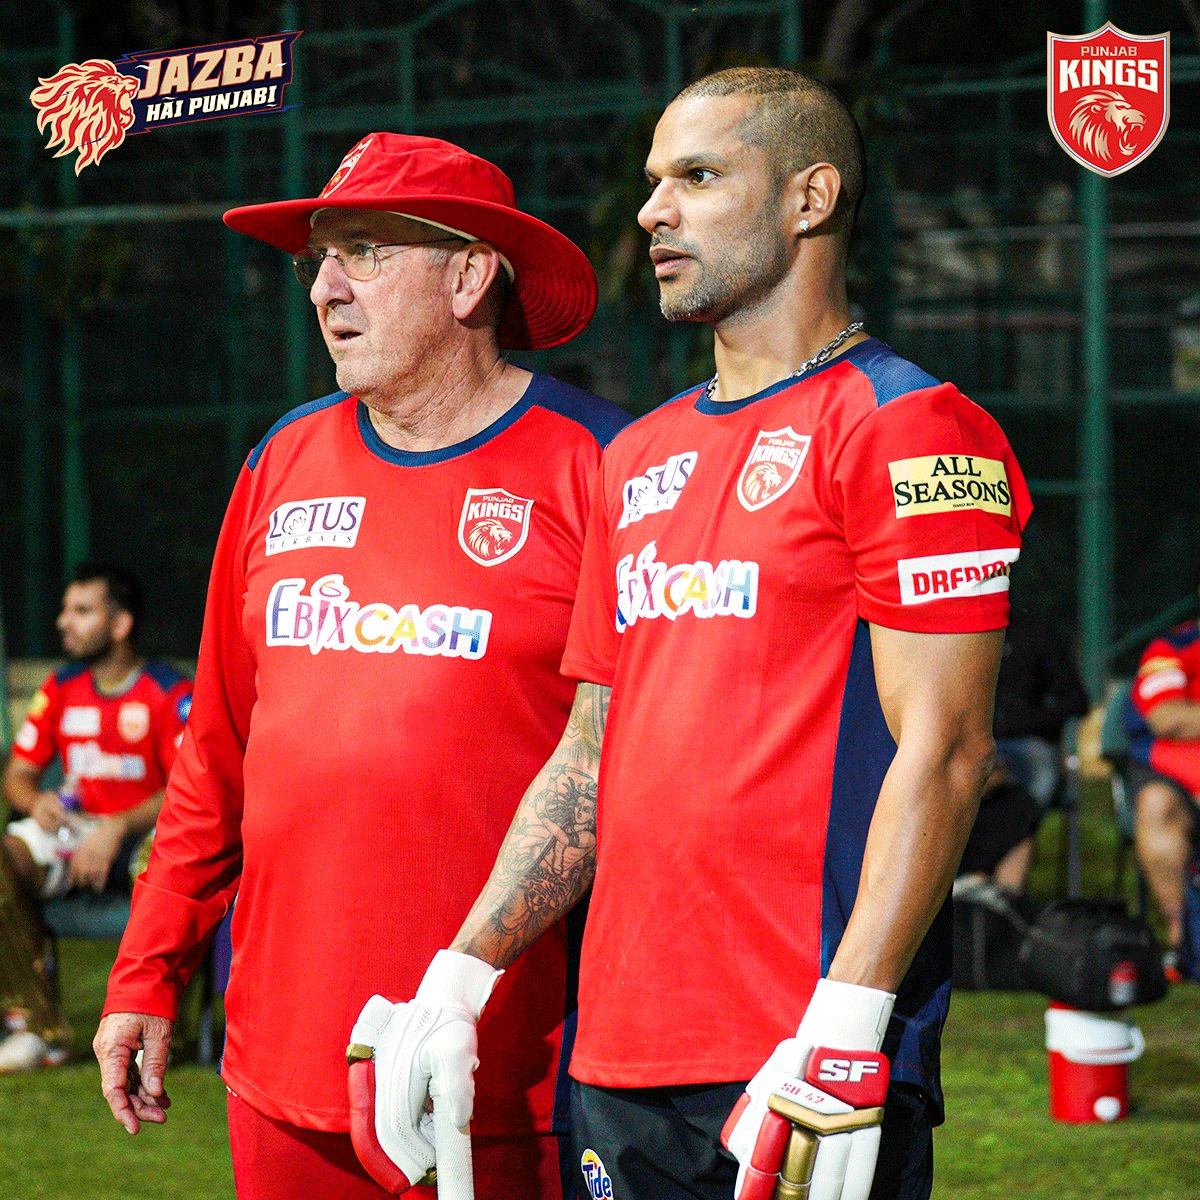 Trevor Bayliss and Shikhar Dhawan will hope to revive Punjab Kings' fortunes in the IPL